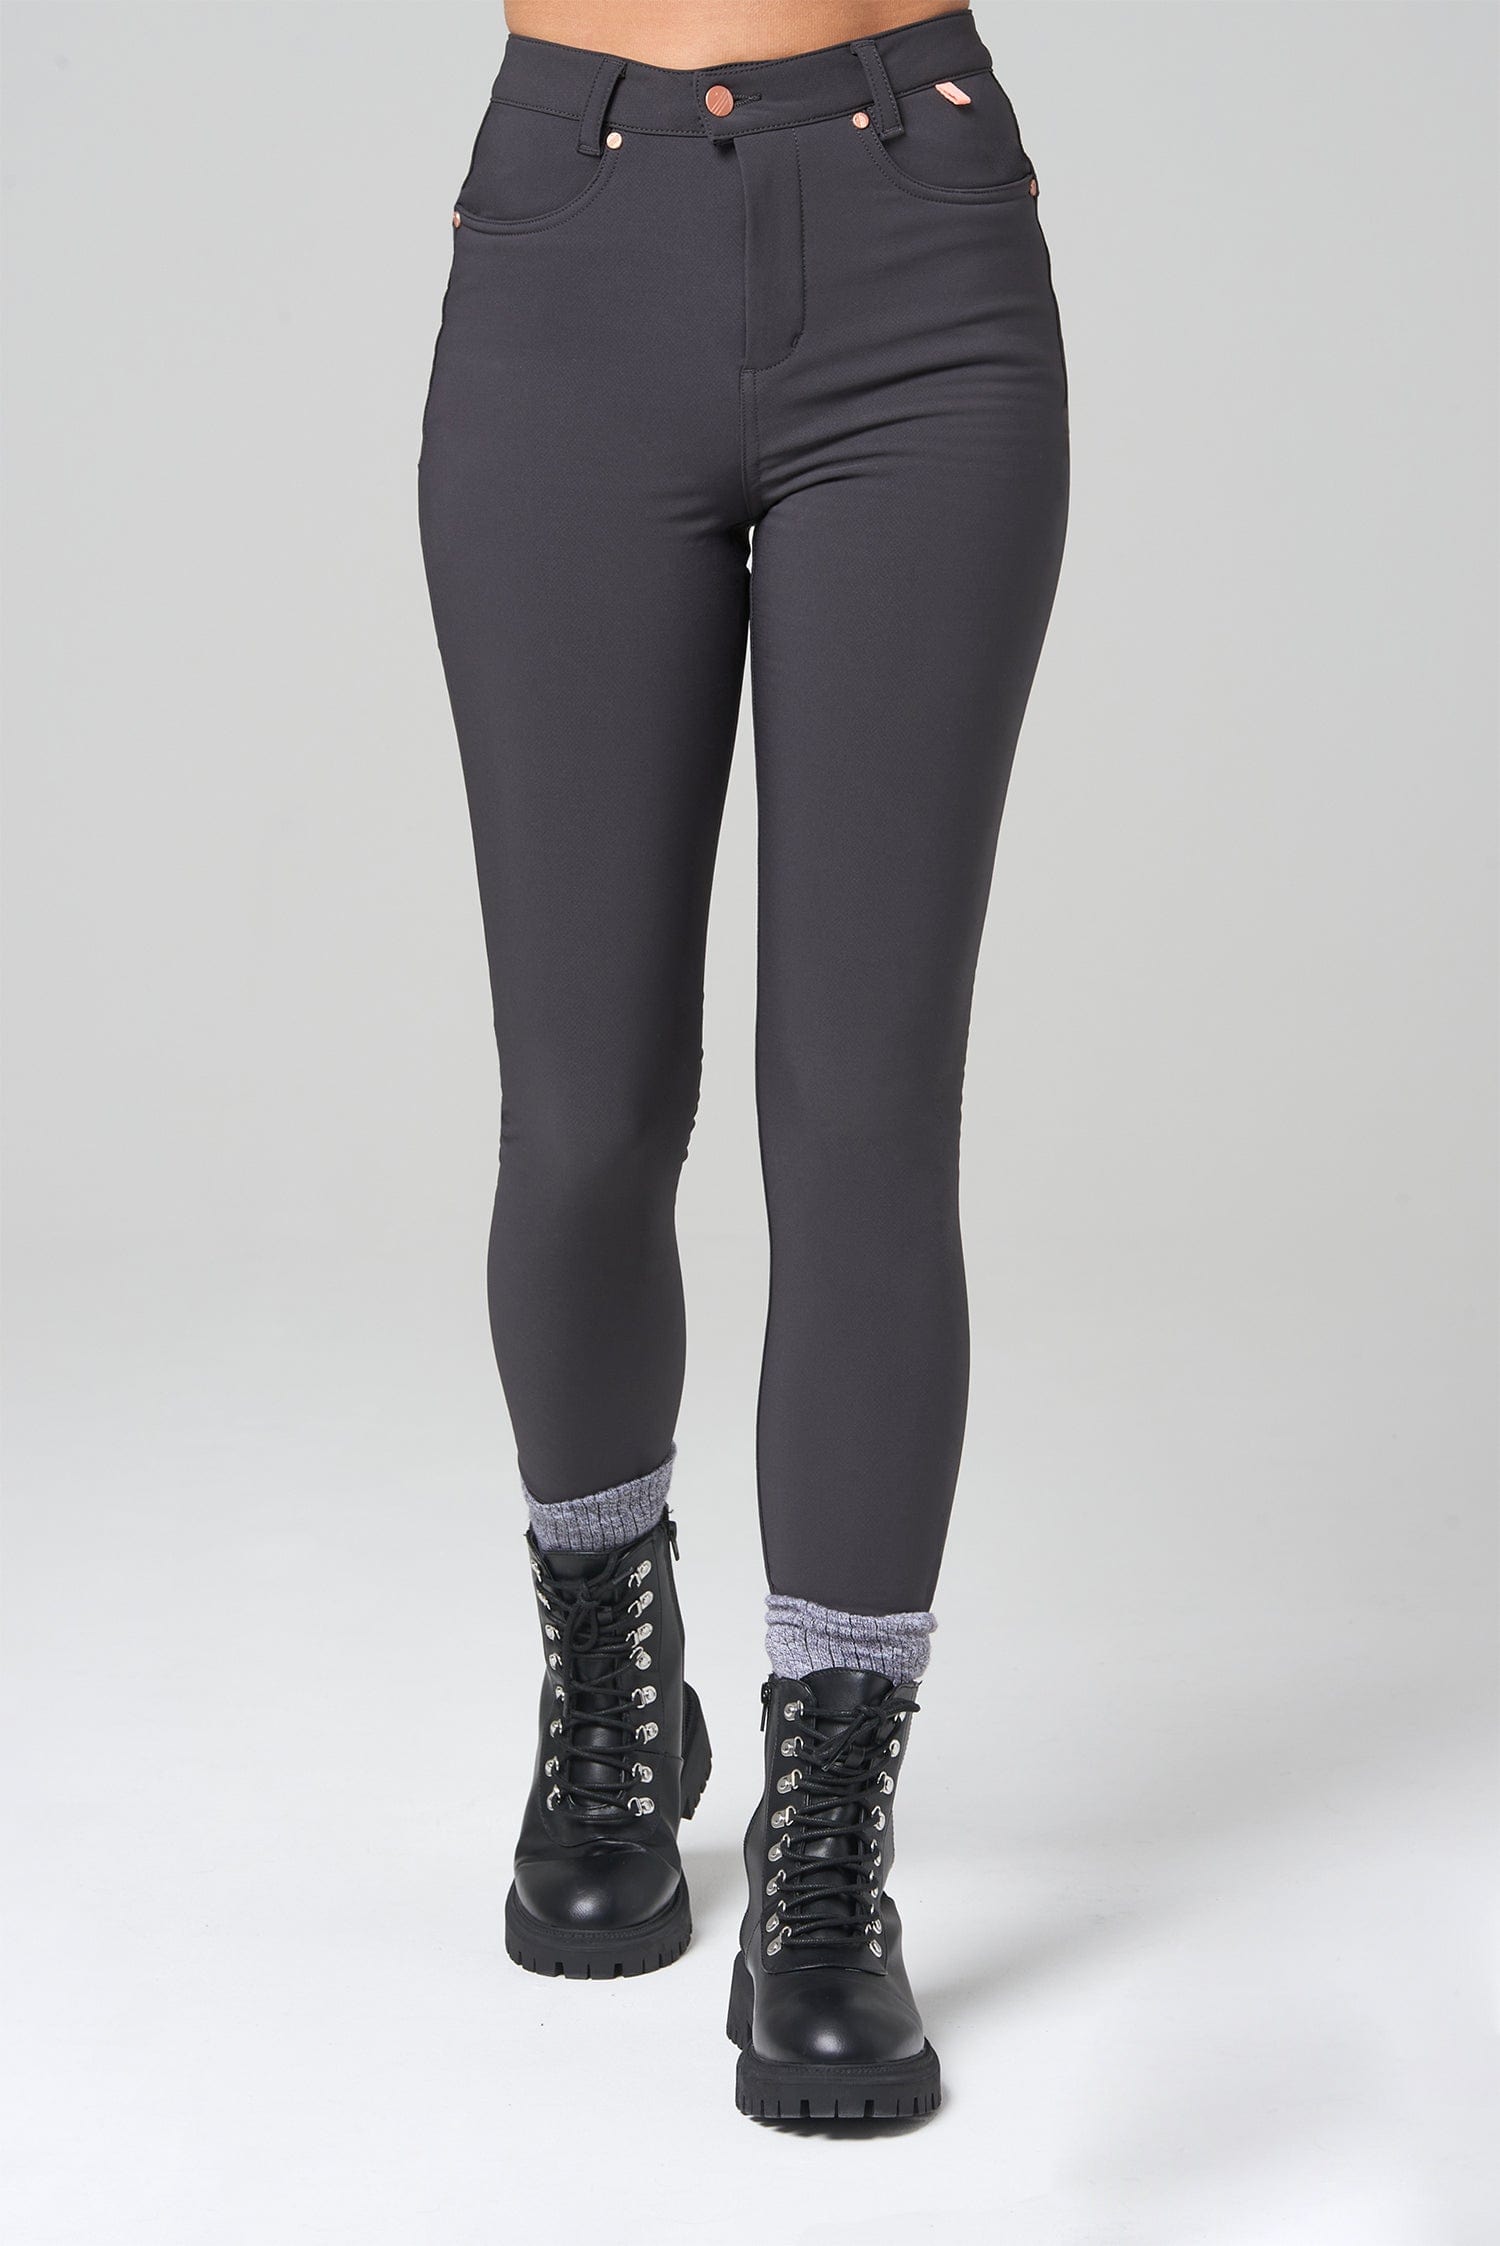 Thermal Skinny Outdoor Trousers - Charcoal Trousers  